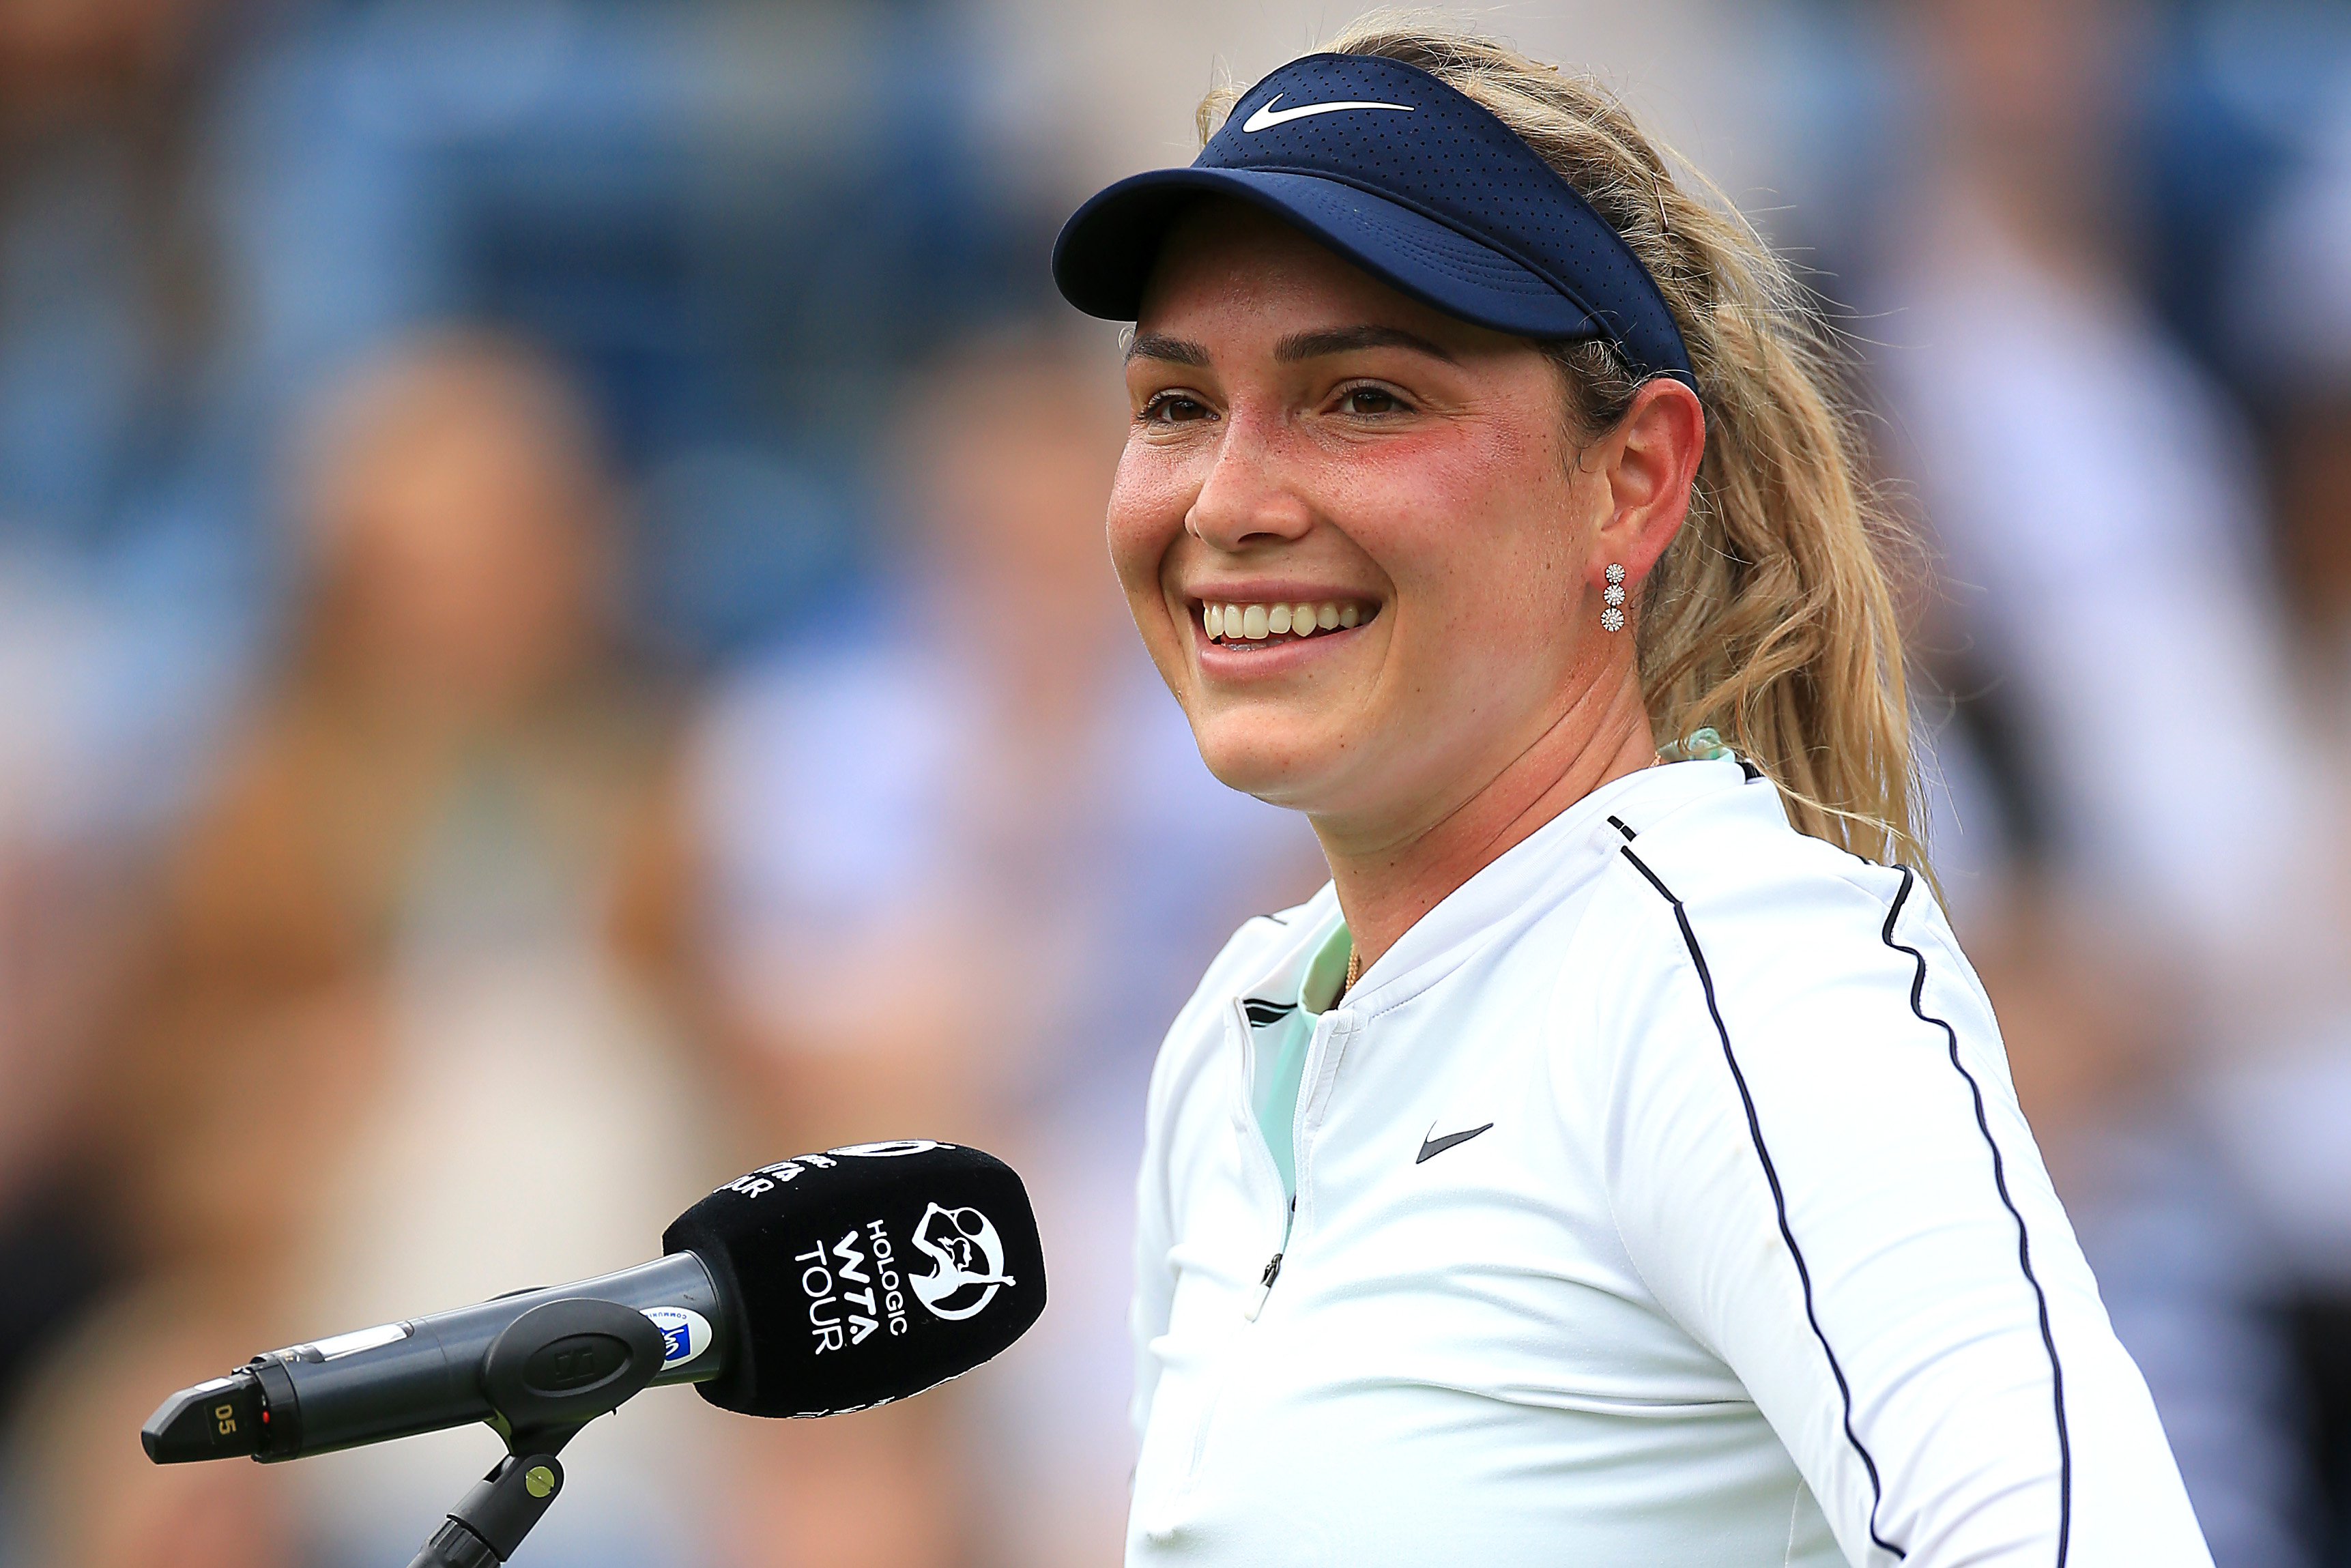 binding Erobre hævn Donna Vekic chases pre-pandemic peak as Citi Open return kicks off US Open  campaign